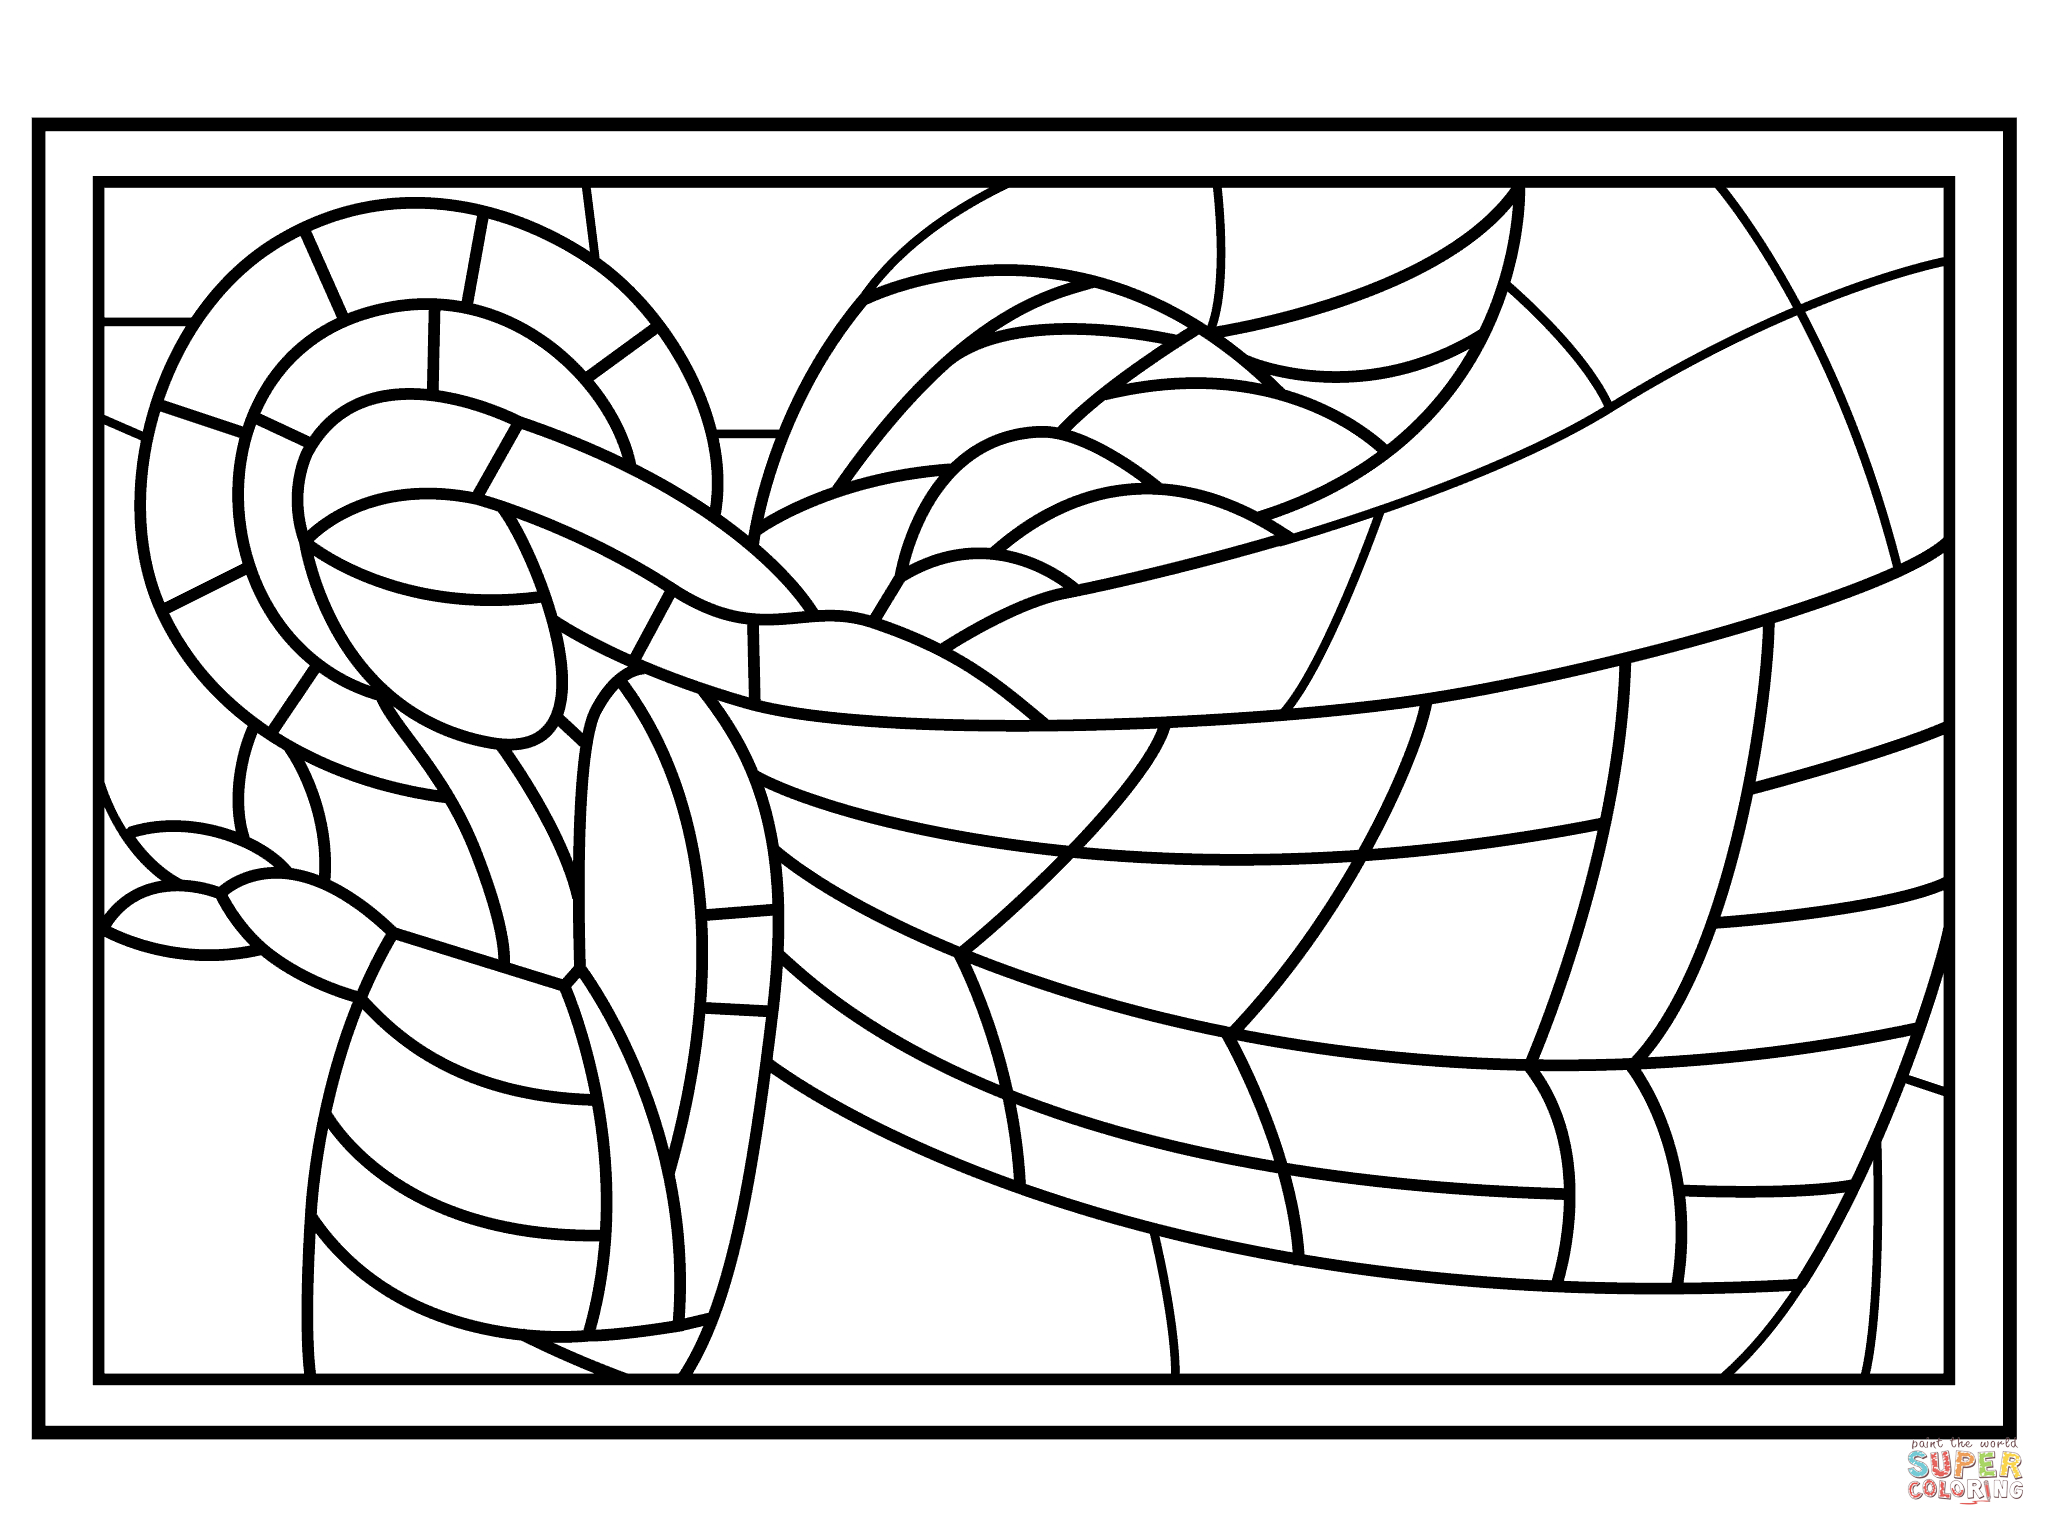 The Ascension Stained Glass Coloring Page | Free Printable - Free Printable Religious Stained Glass Patterns